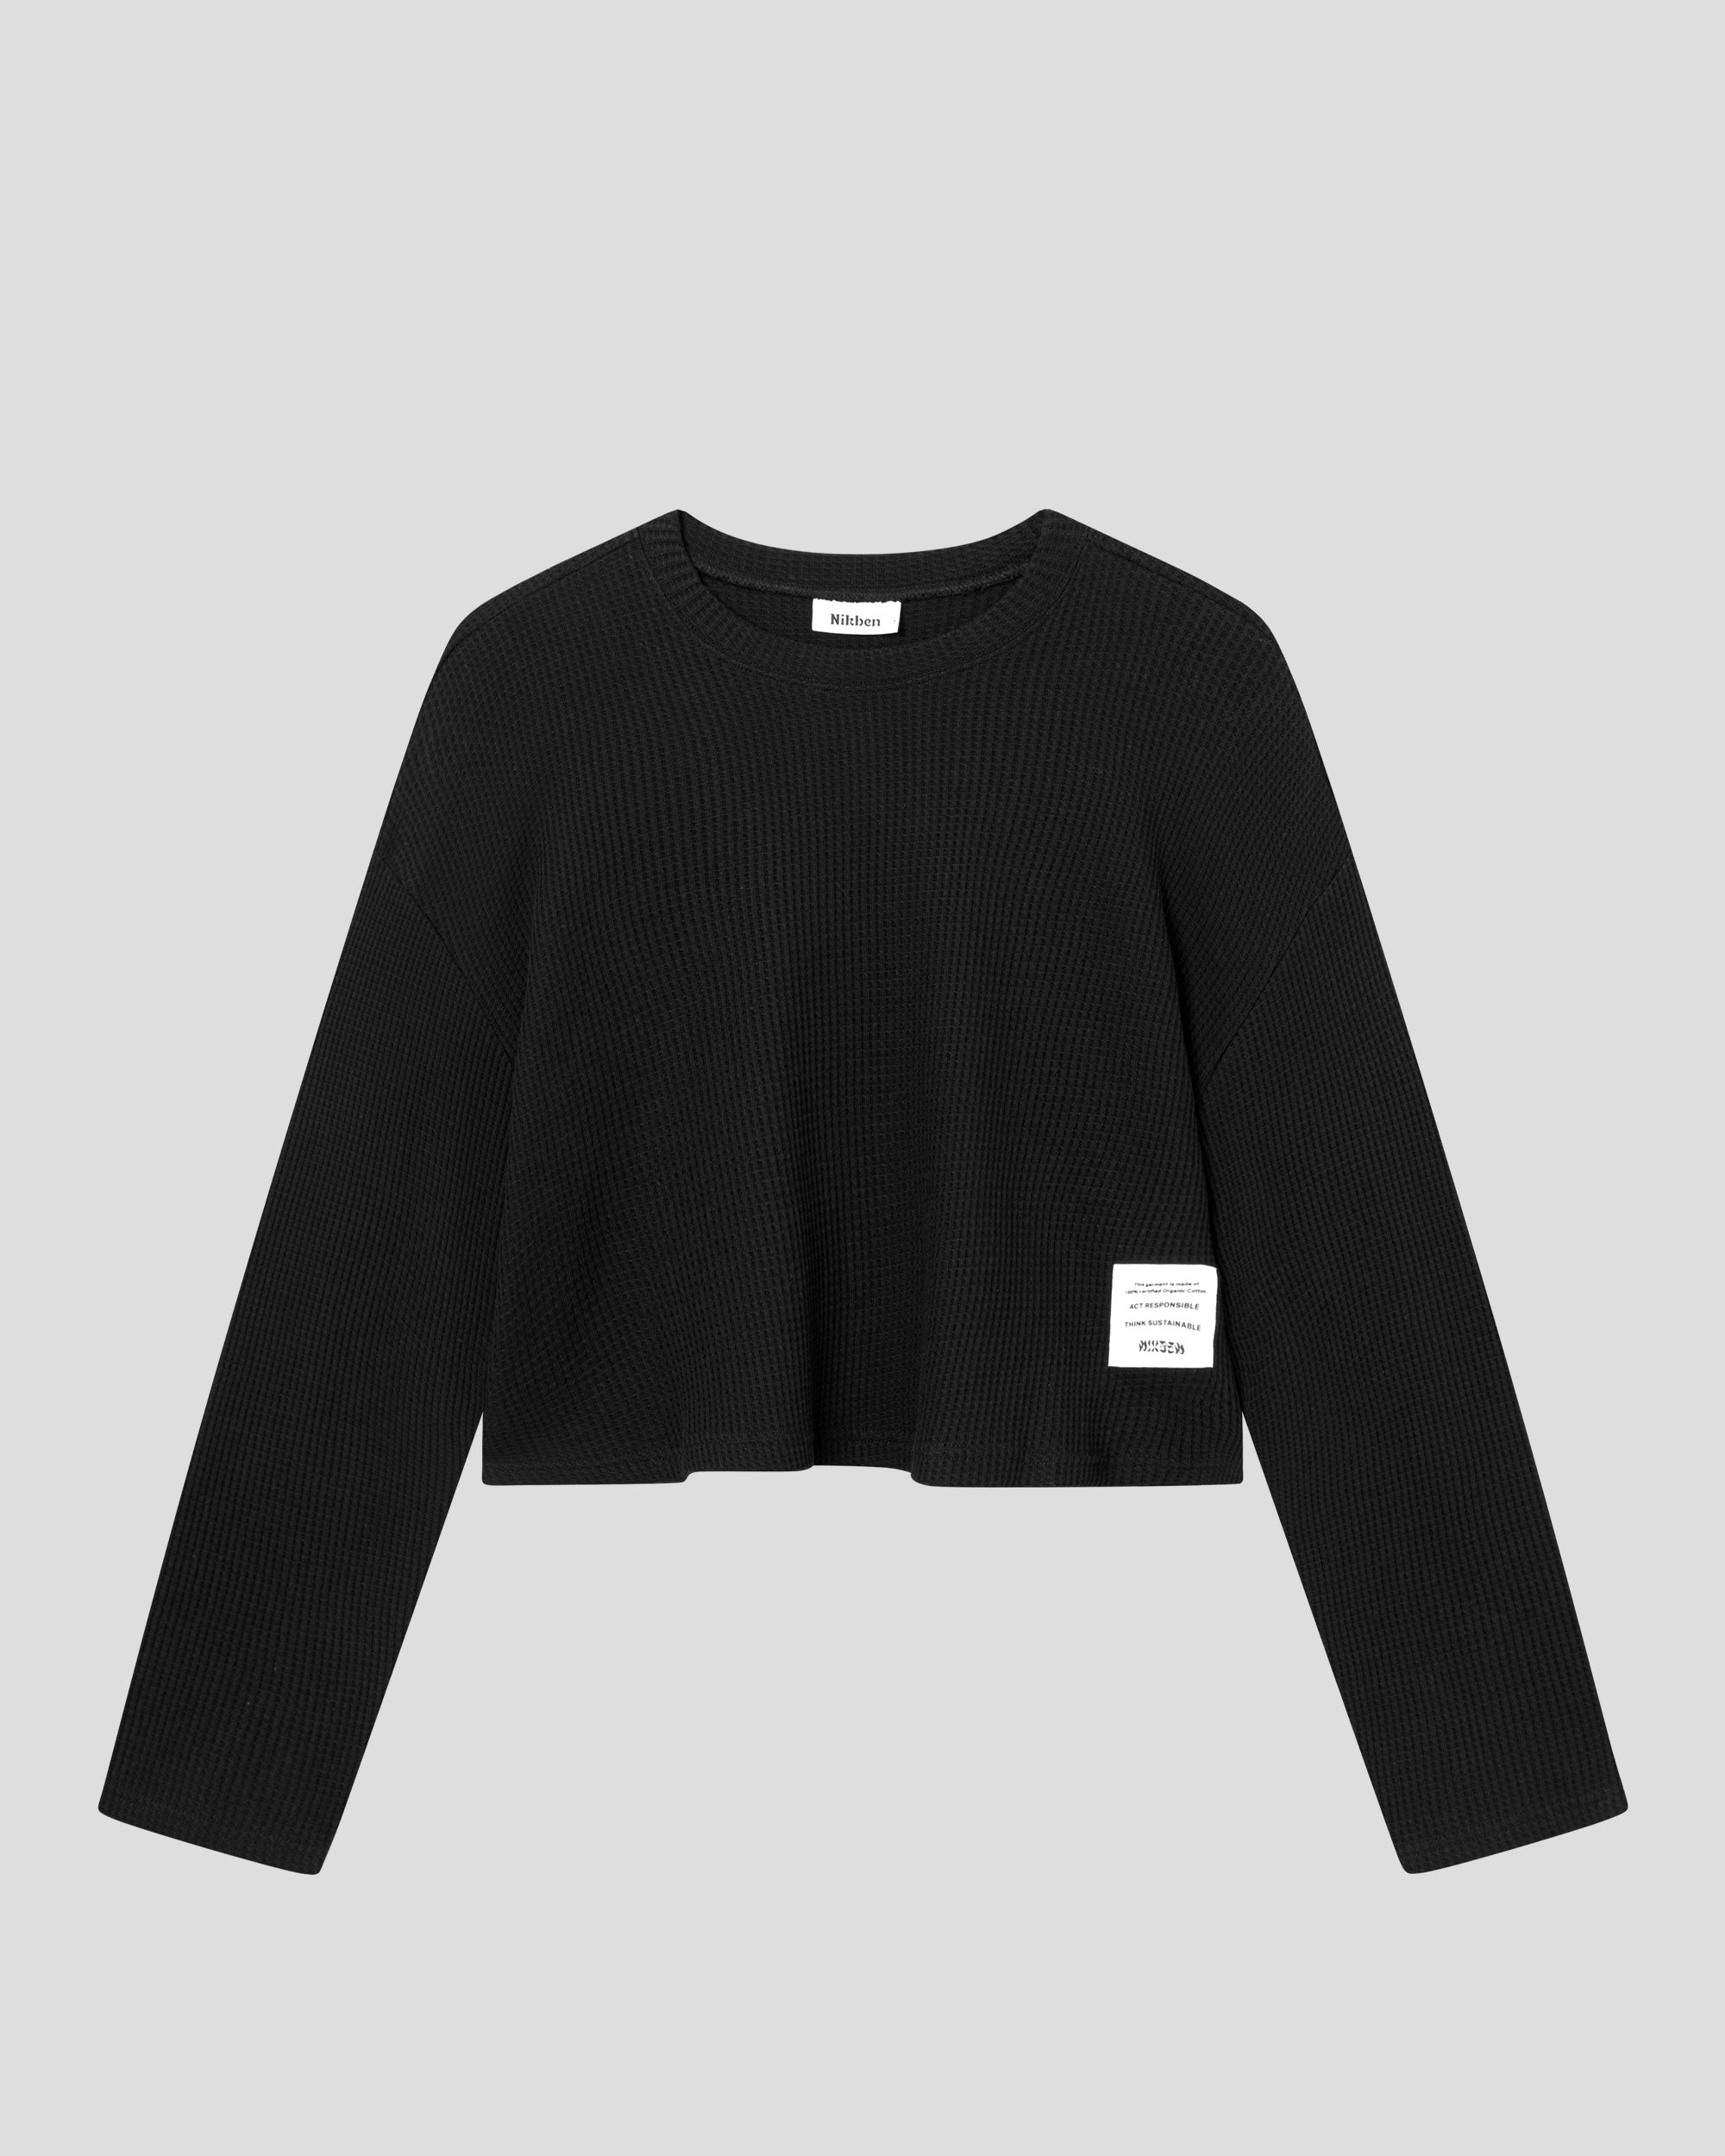 Black waffle-patterned cropped sweatshirt with a stitched-on material label.